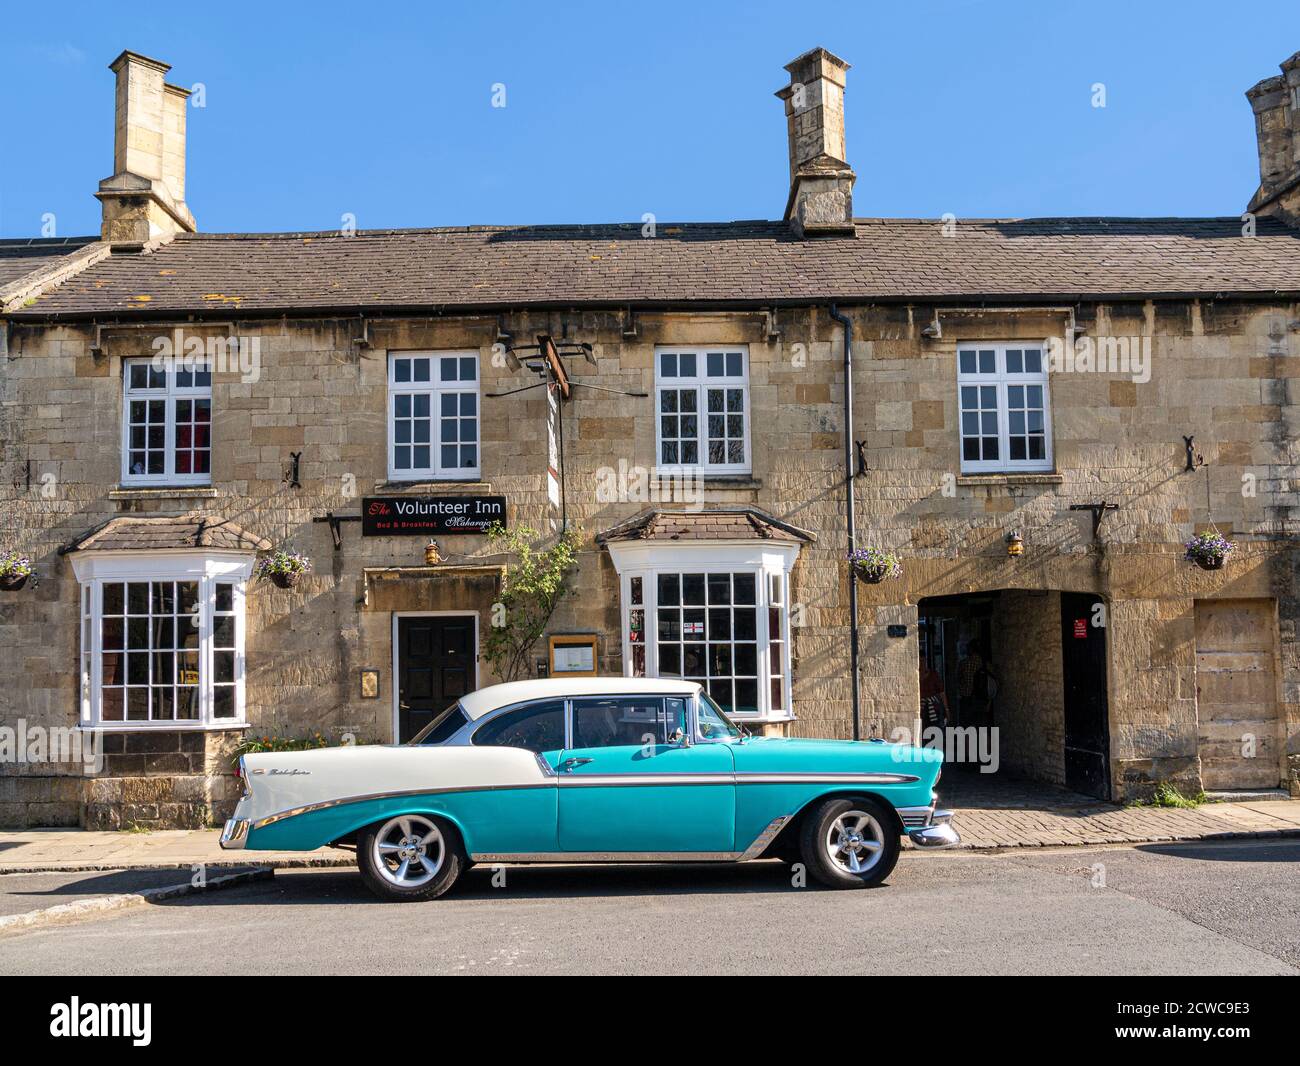 1950's/60's Chevrolet Bel Air Hardtop American Two Door classic car outside a Cotswolds B&B public house Chipping Campden UK Stock Photo